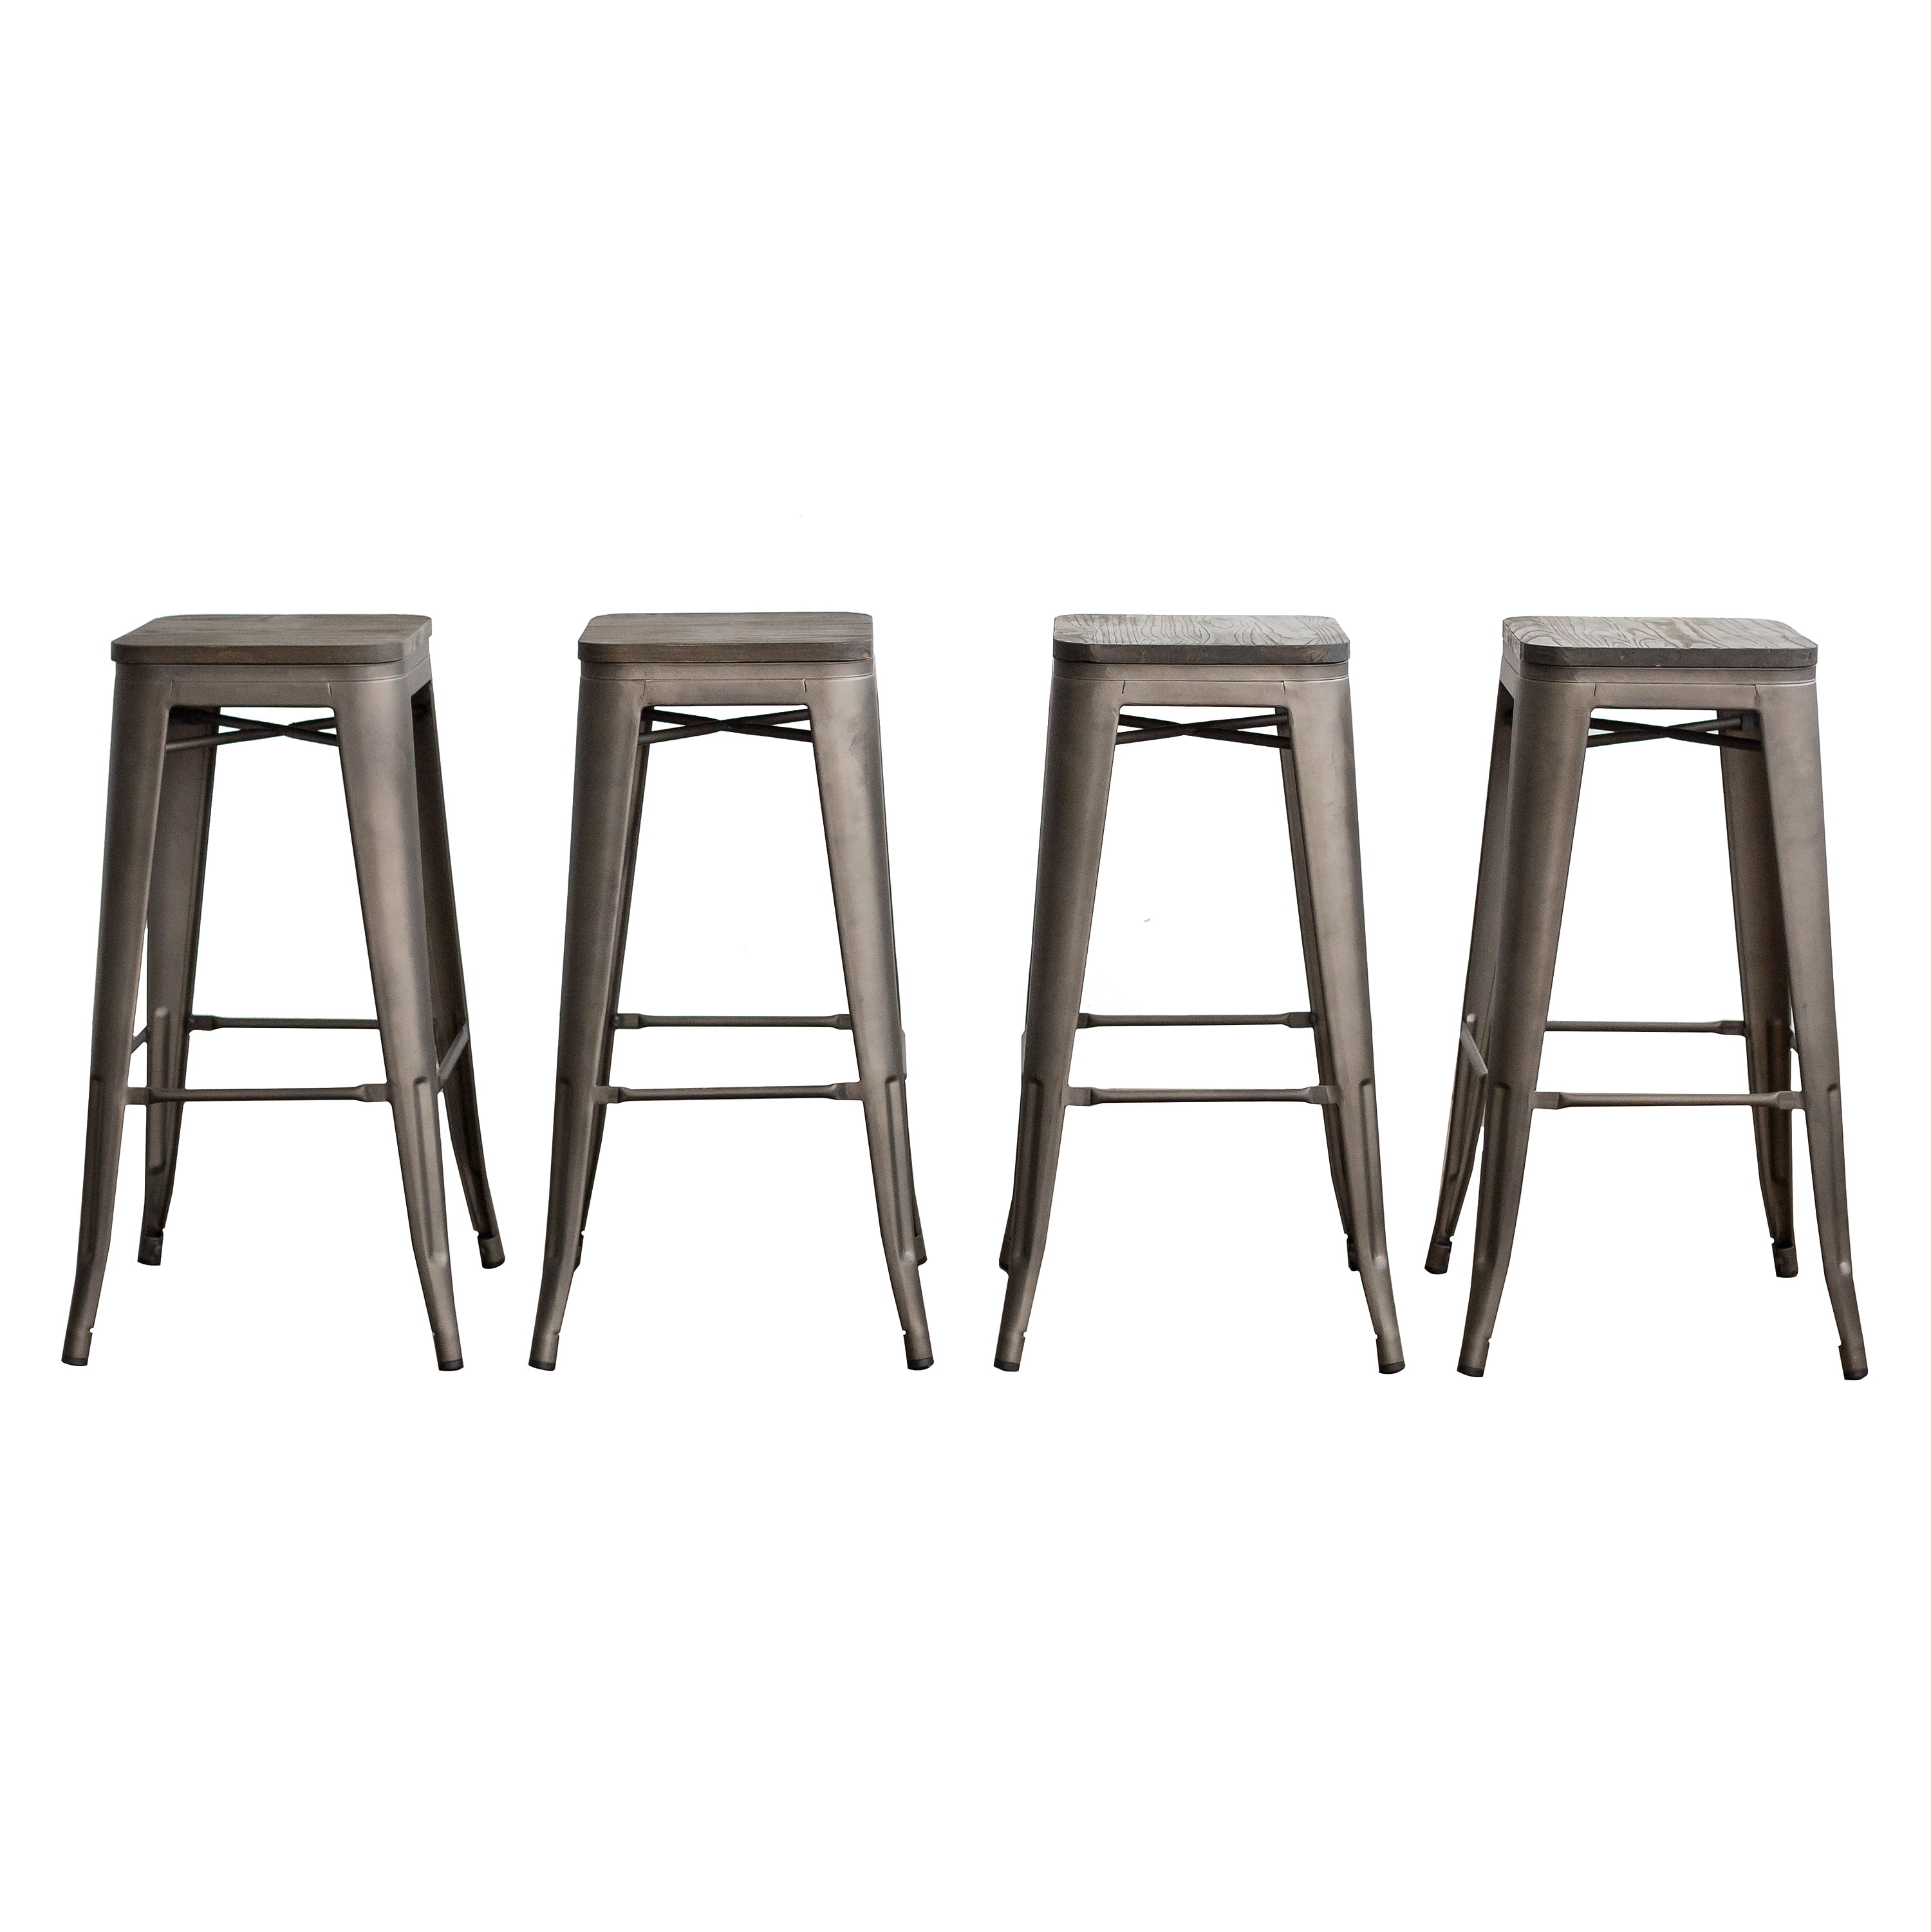 Set of Four Bronze 24 Inches Counter High Bar Stools Indoor/Outdoor Stackable 